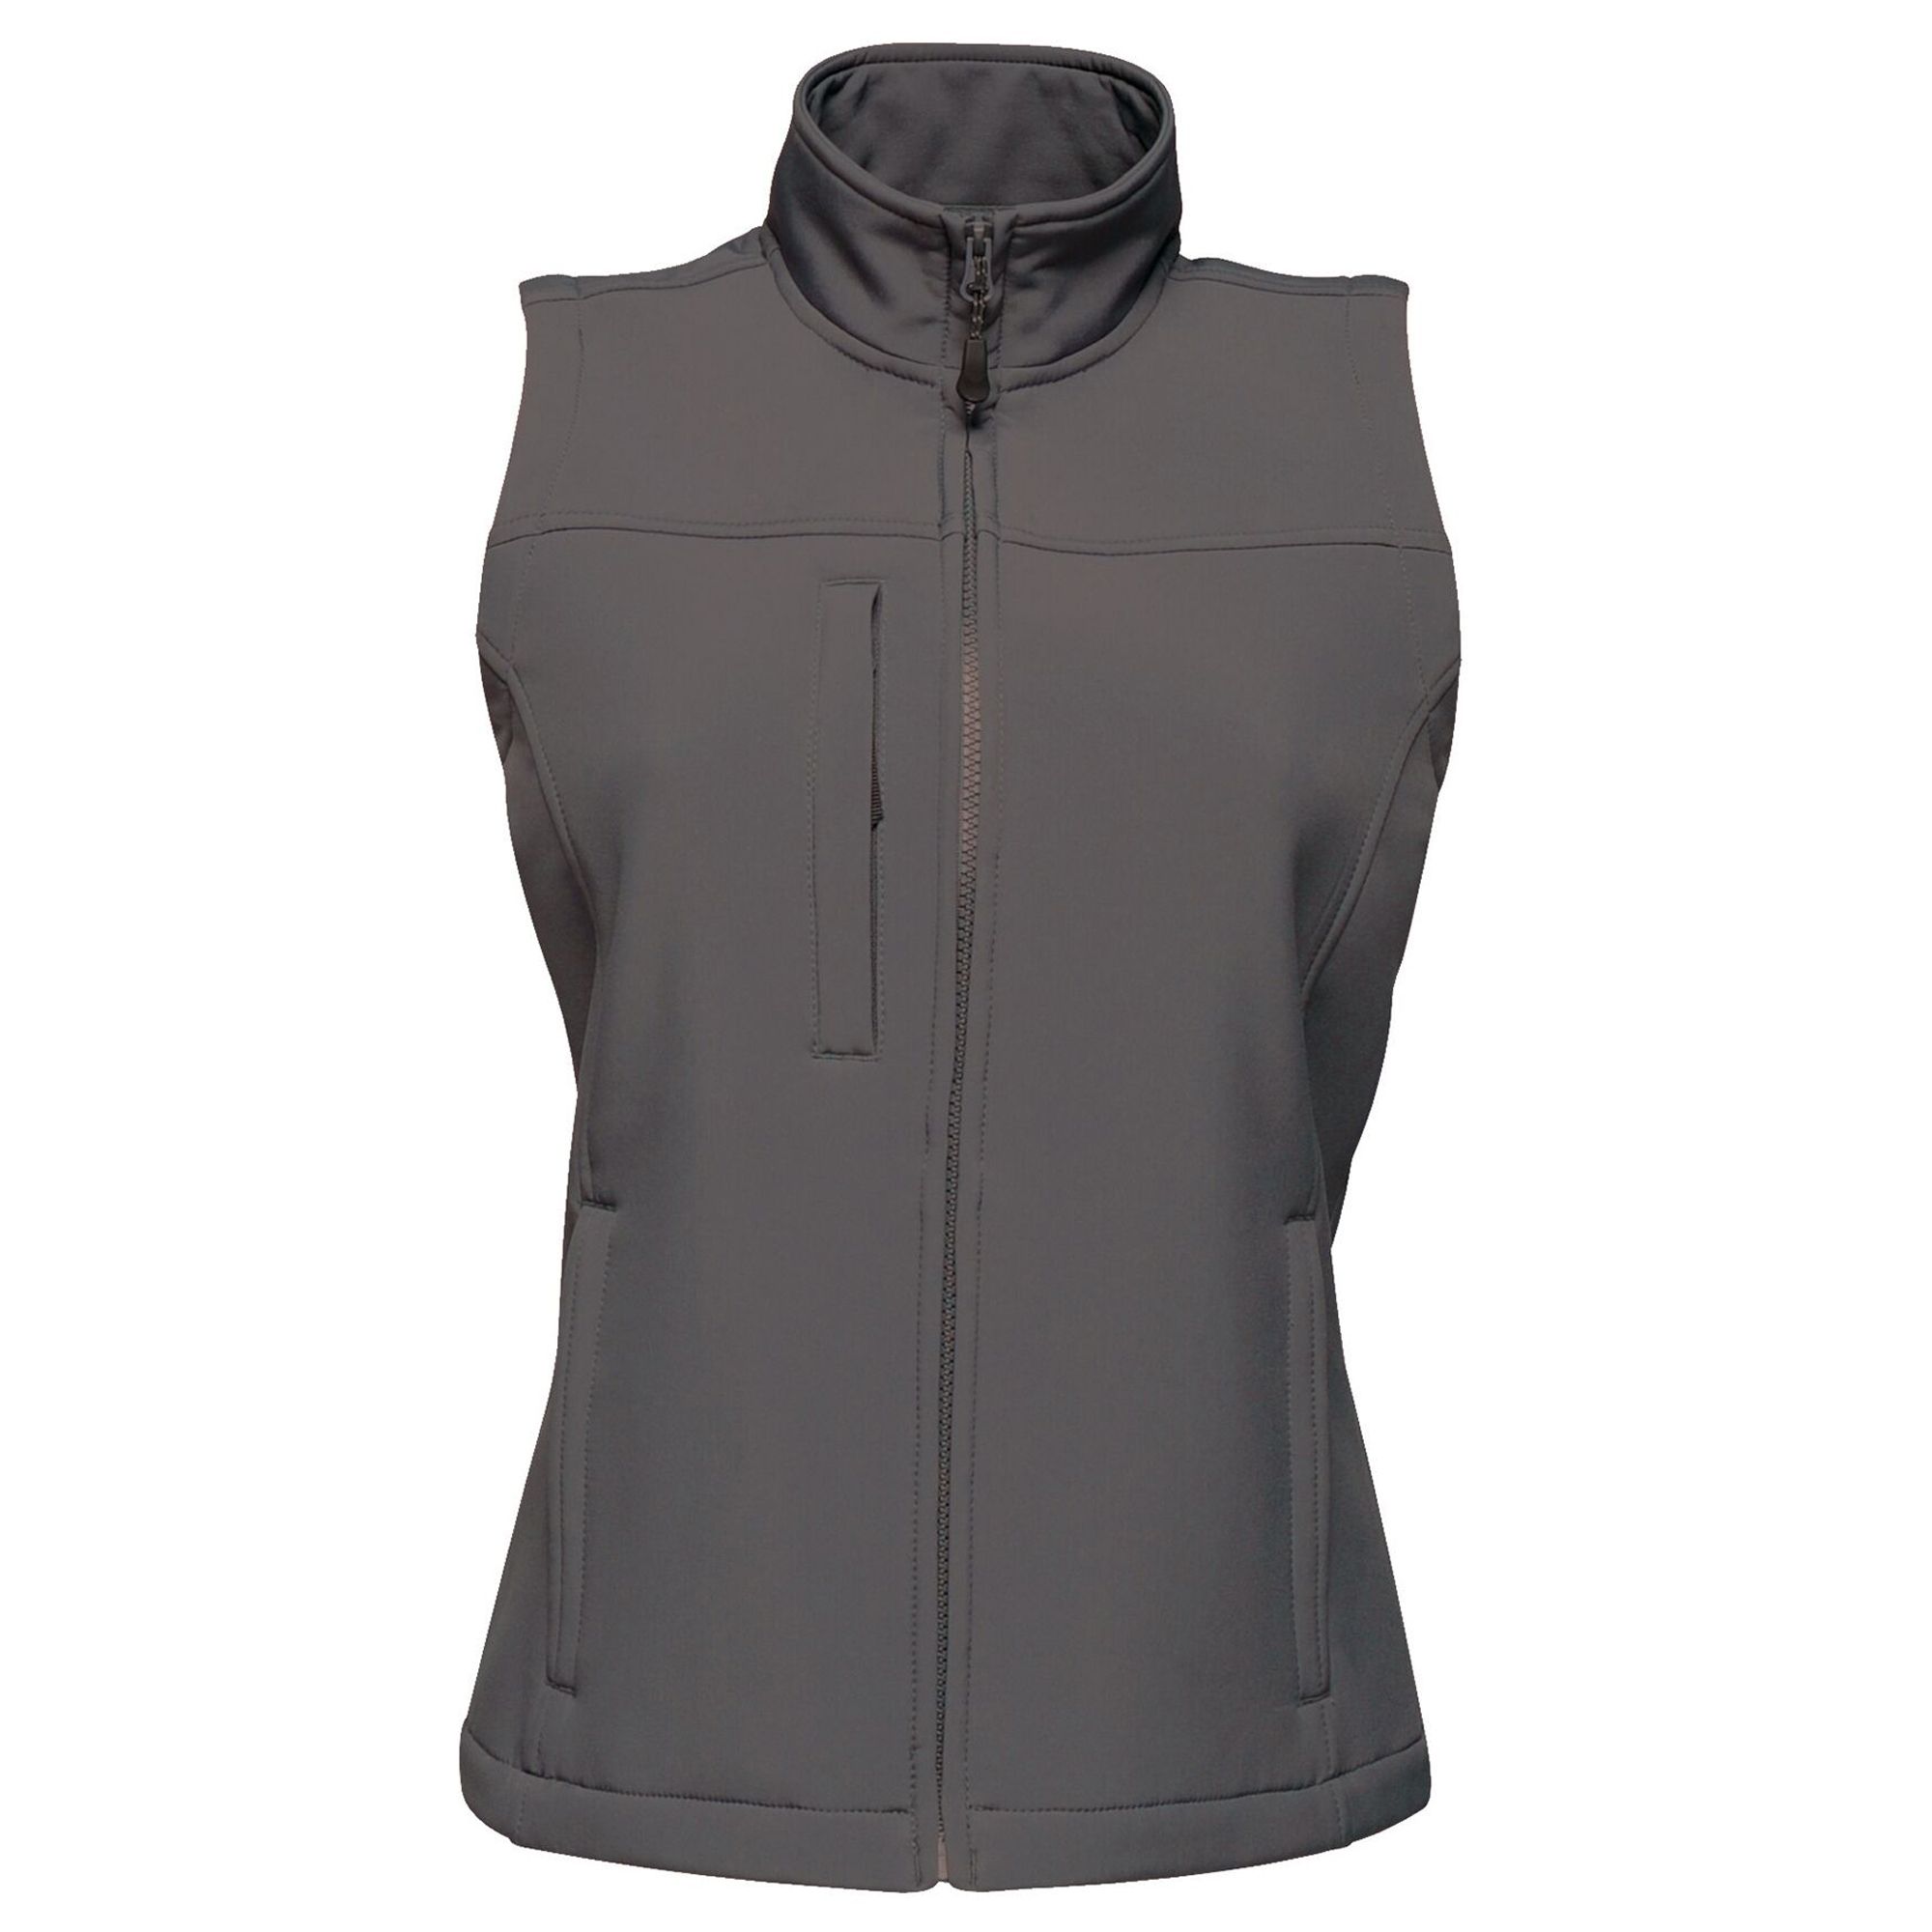 Warm backed woven stretch Softshell fabric in a durable water repellent finish. Wind resistant, quick drying and super soft handle. 2 zipped lower pockets and 1 zipped chest pocket. Lightweight and easy to wear in a shaped fit with adjustable shockcord hem. Regatta Womens sizing (bust approx): 6 (30in/76cm), 8 (32in/81cm), 10 (34in/86cm), 12 (36in/92cm), 14 (38in/97cm), 16 (40in/102cm), 18 (43in/109cm), 20 (45in/114cm), 22 (48in/122cm), 24 (50in/127cm), 26 (52in/132cm), 28 (54in/137cm), 30 (56in/142cm), 32 (58in/147cm), 34 (60in/152cm), 36 (62in/158cm). 96% polyester/4% elastane outer.